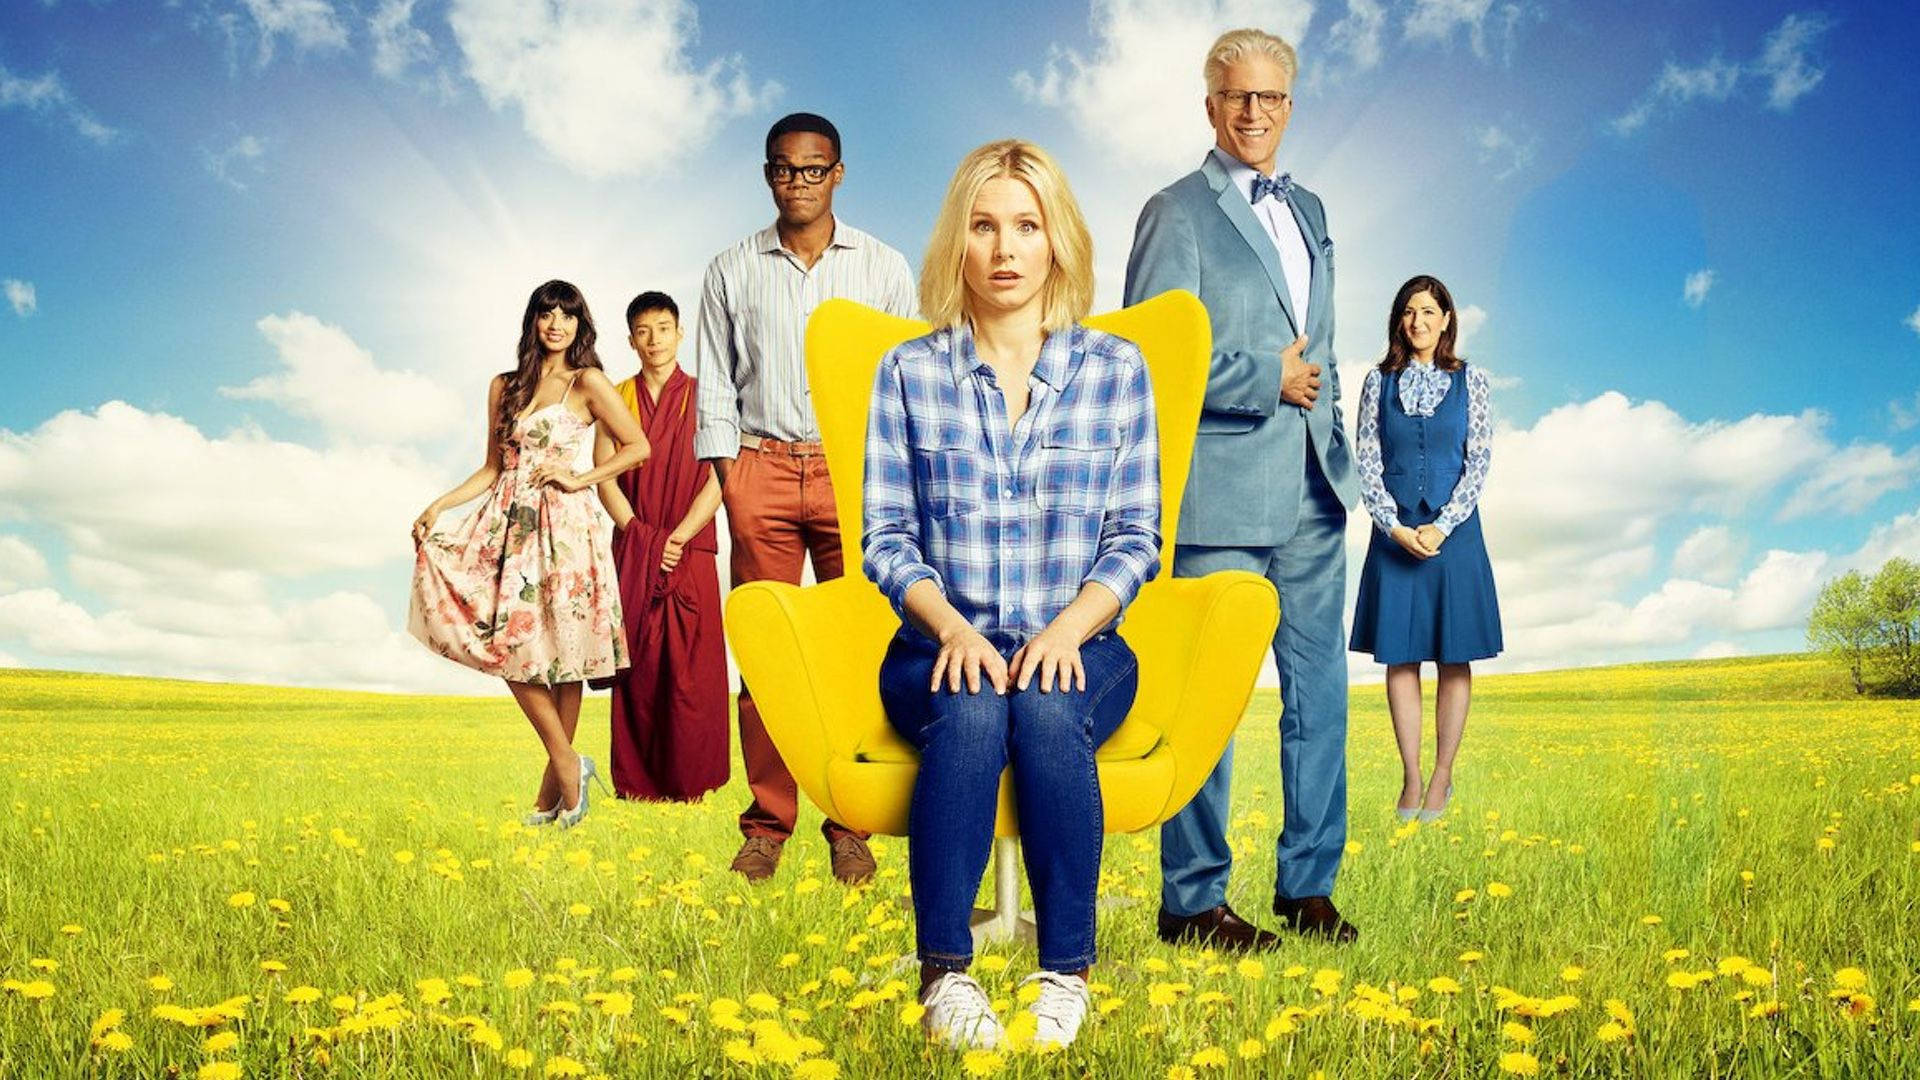 The Good Place Series Poster Wallpaper